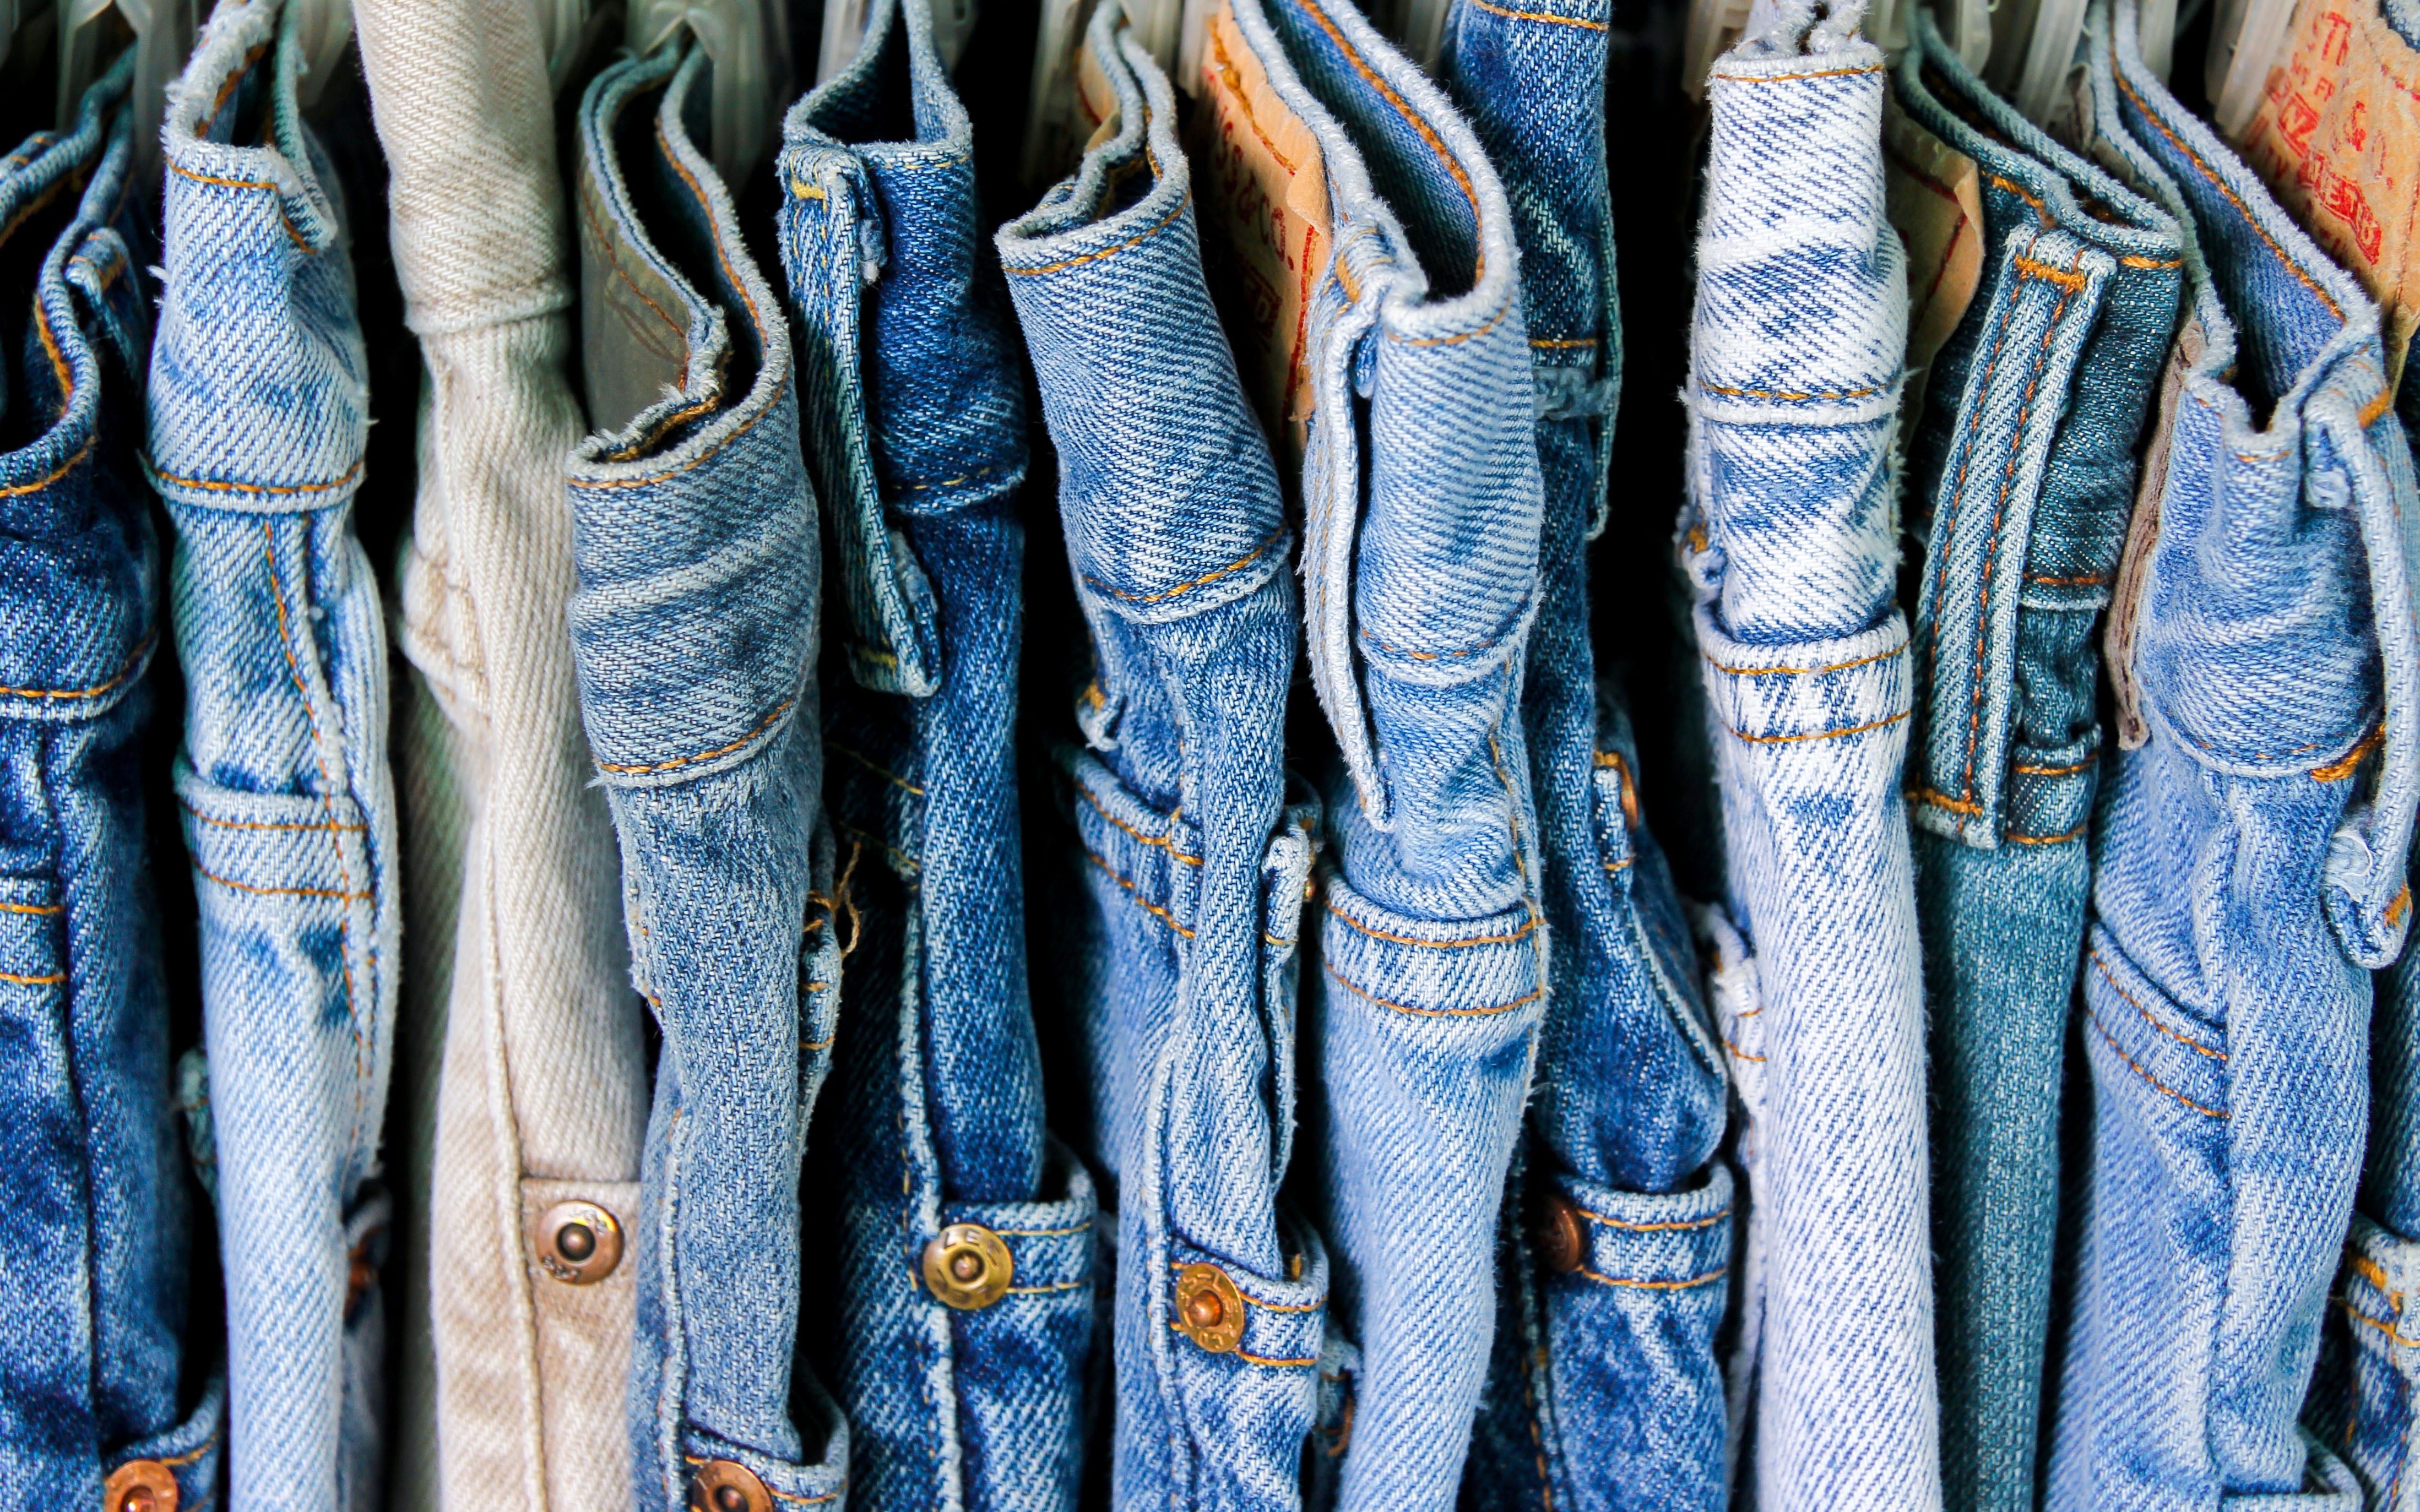 Asser hatred Rich man Asked and Answered: How Often Should You Wash Your Jeans? - FASHION Magazine